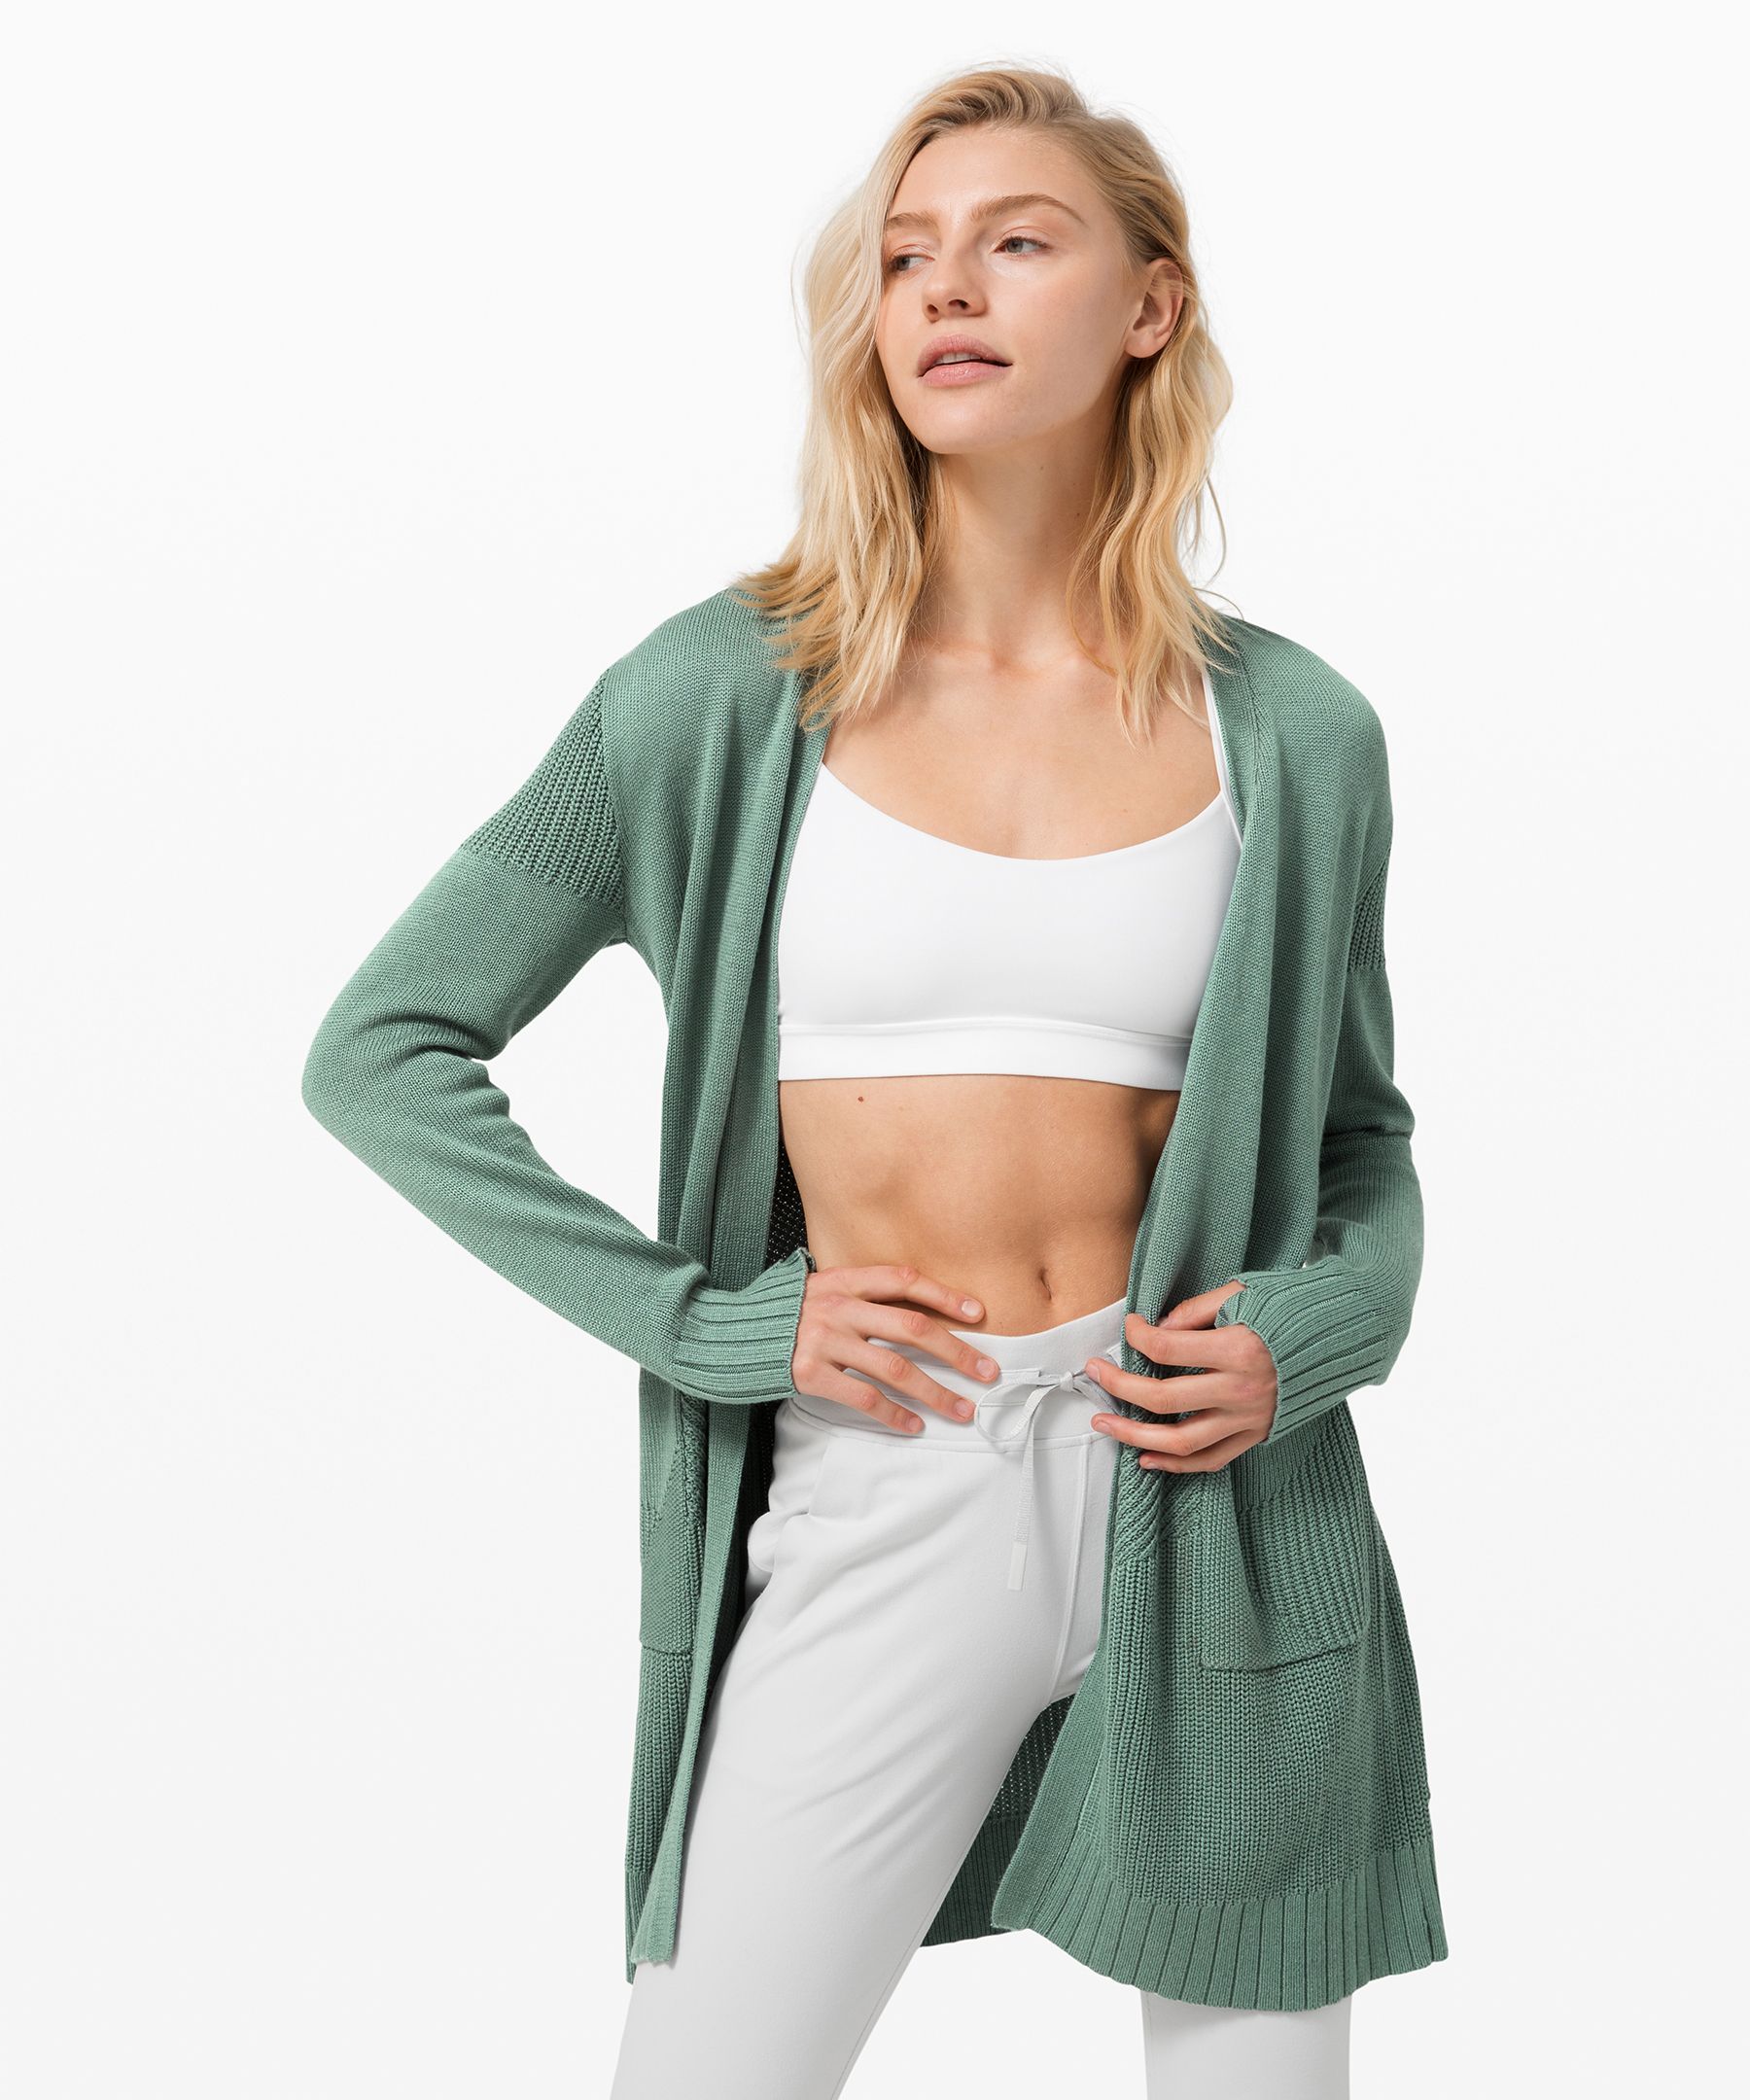 Lululemon Sincerely Yours Wrap Sweater In Tidewater Teal | ModeSens